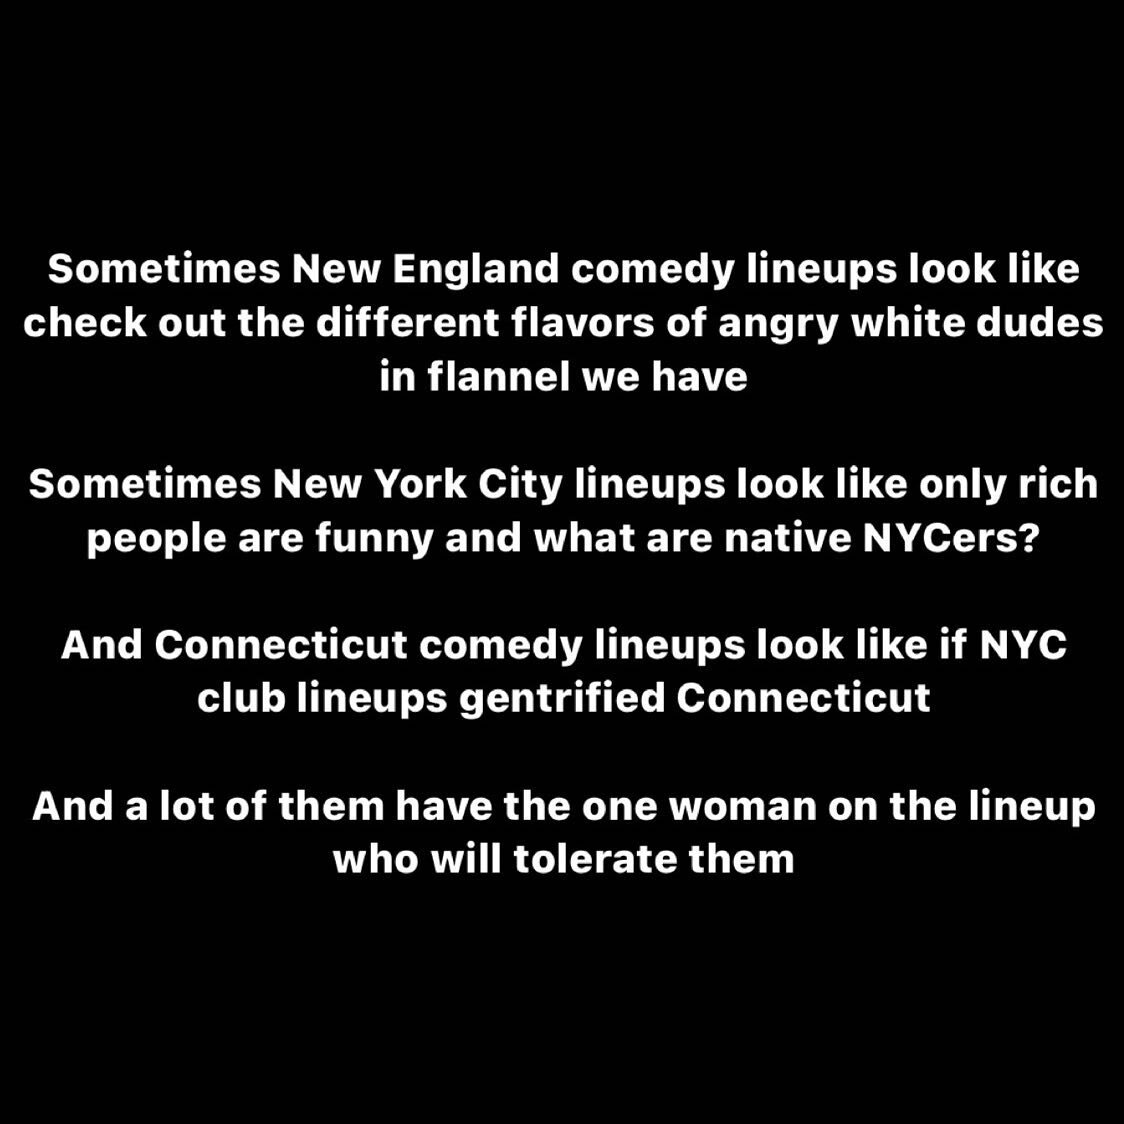 You know who you are

👊💥

#comedy #producer #comedian #newengland #maine #newhampshire #massachusetts #connecticut #vermont #rhodeisland #newyork #nyccomedy #standupcomedy #standup #independent #indie #standupcomedian #writer